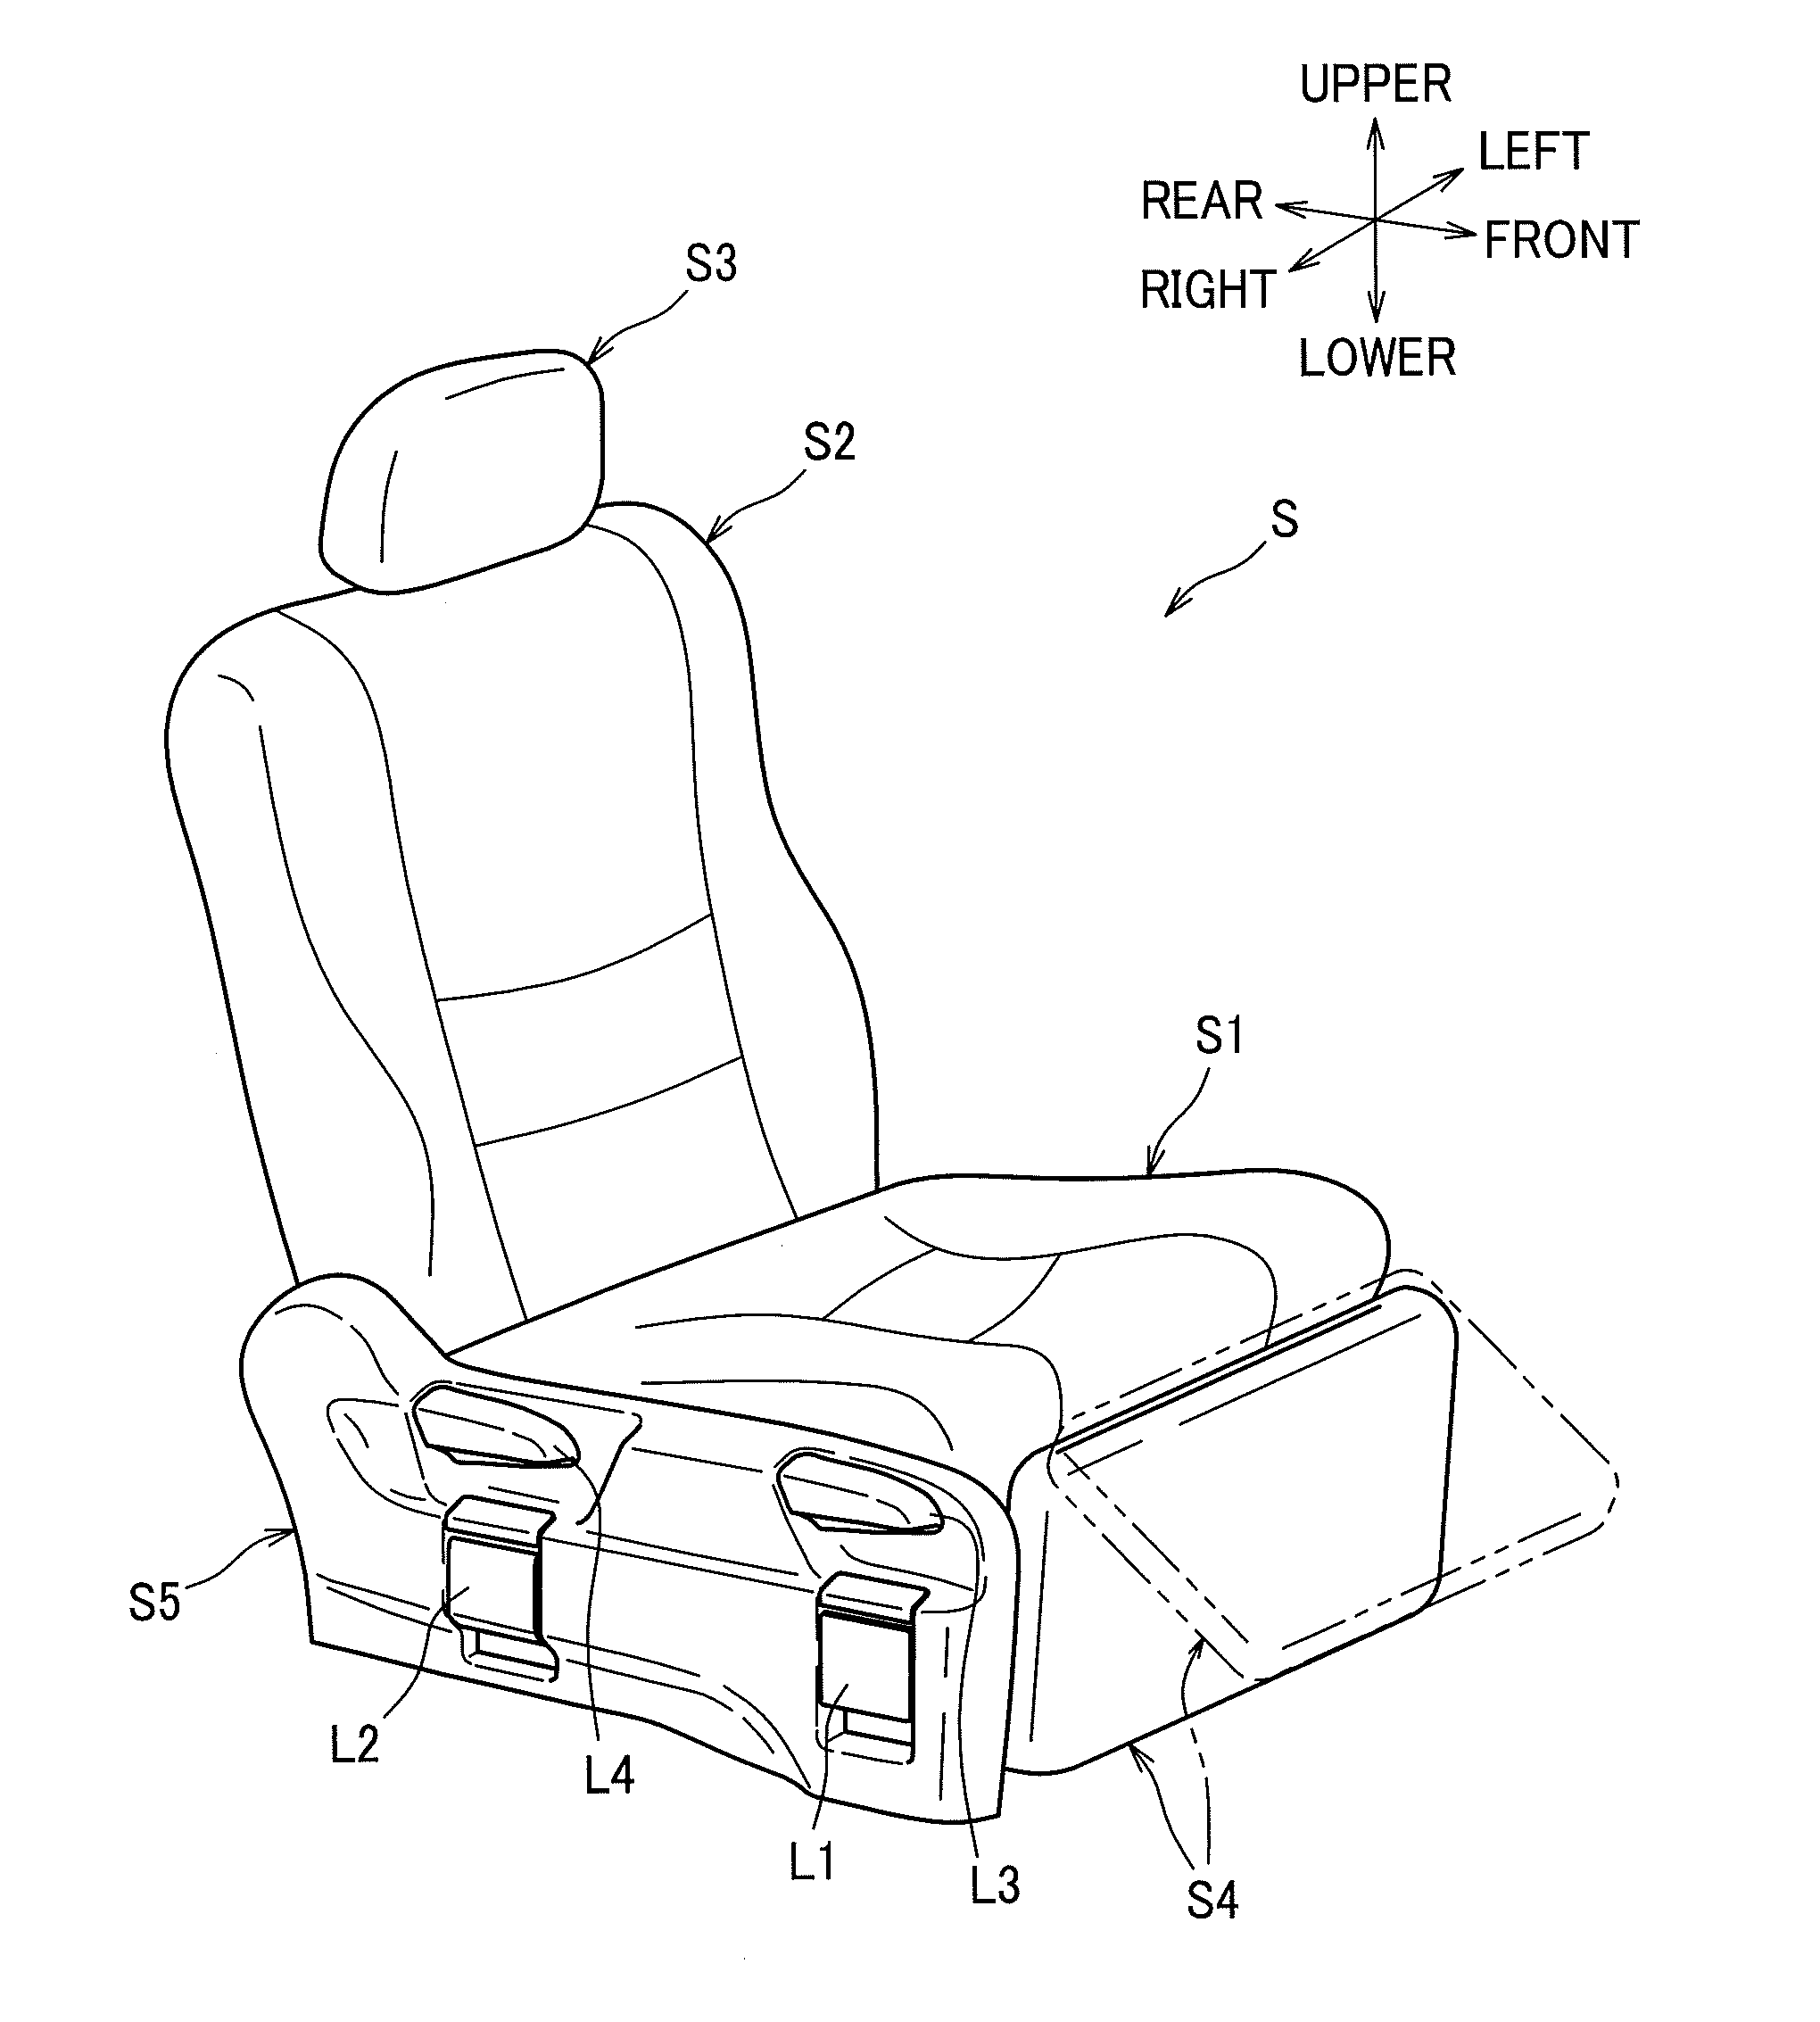 Seat for vehicle